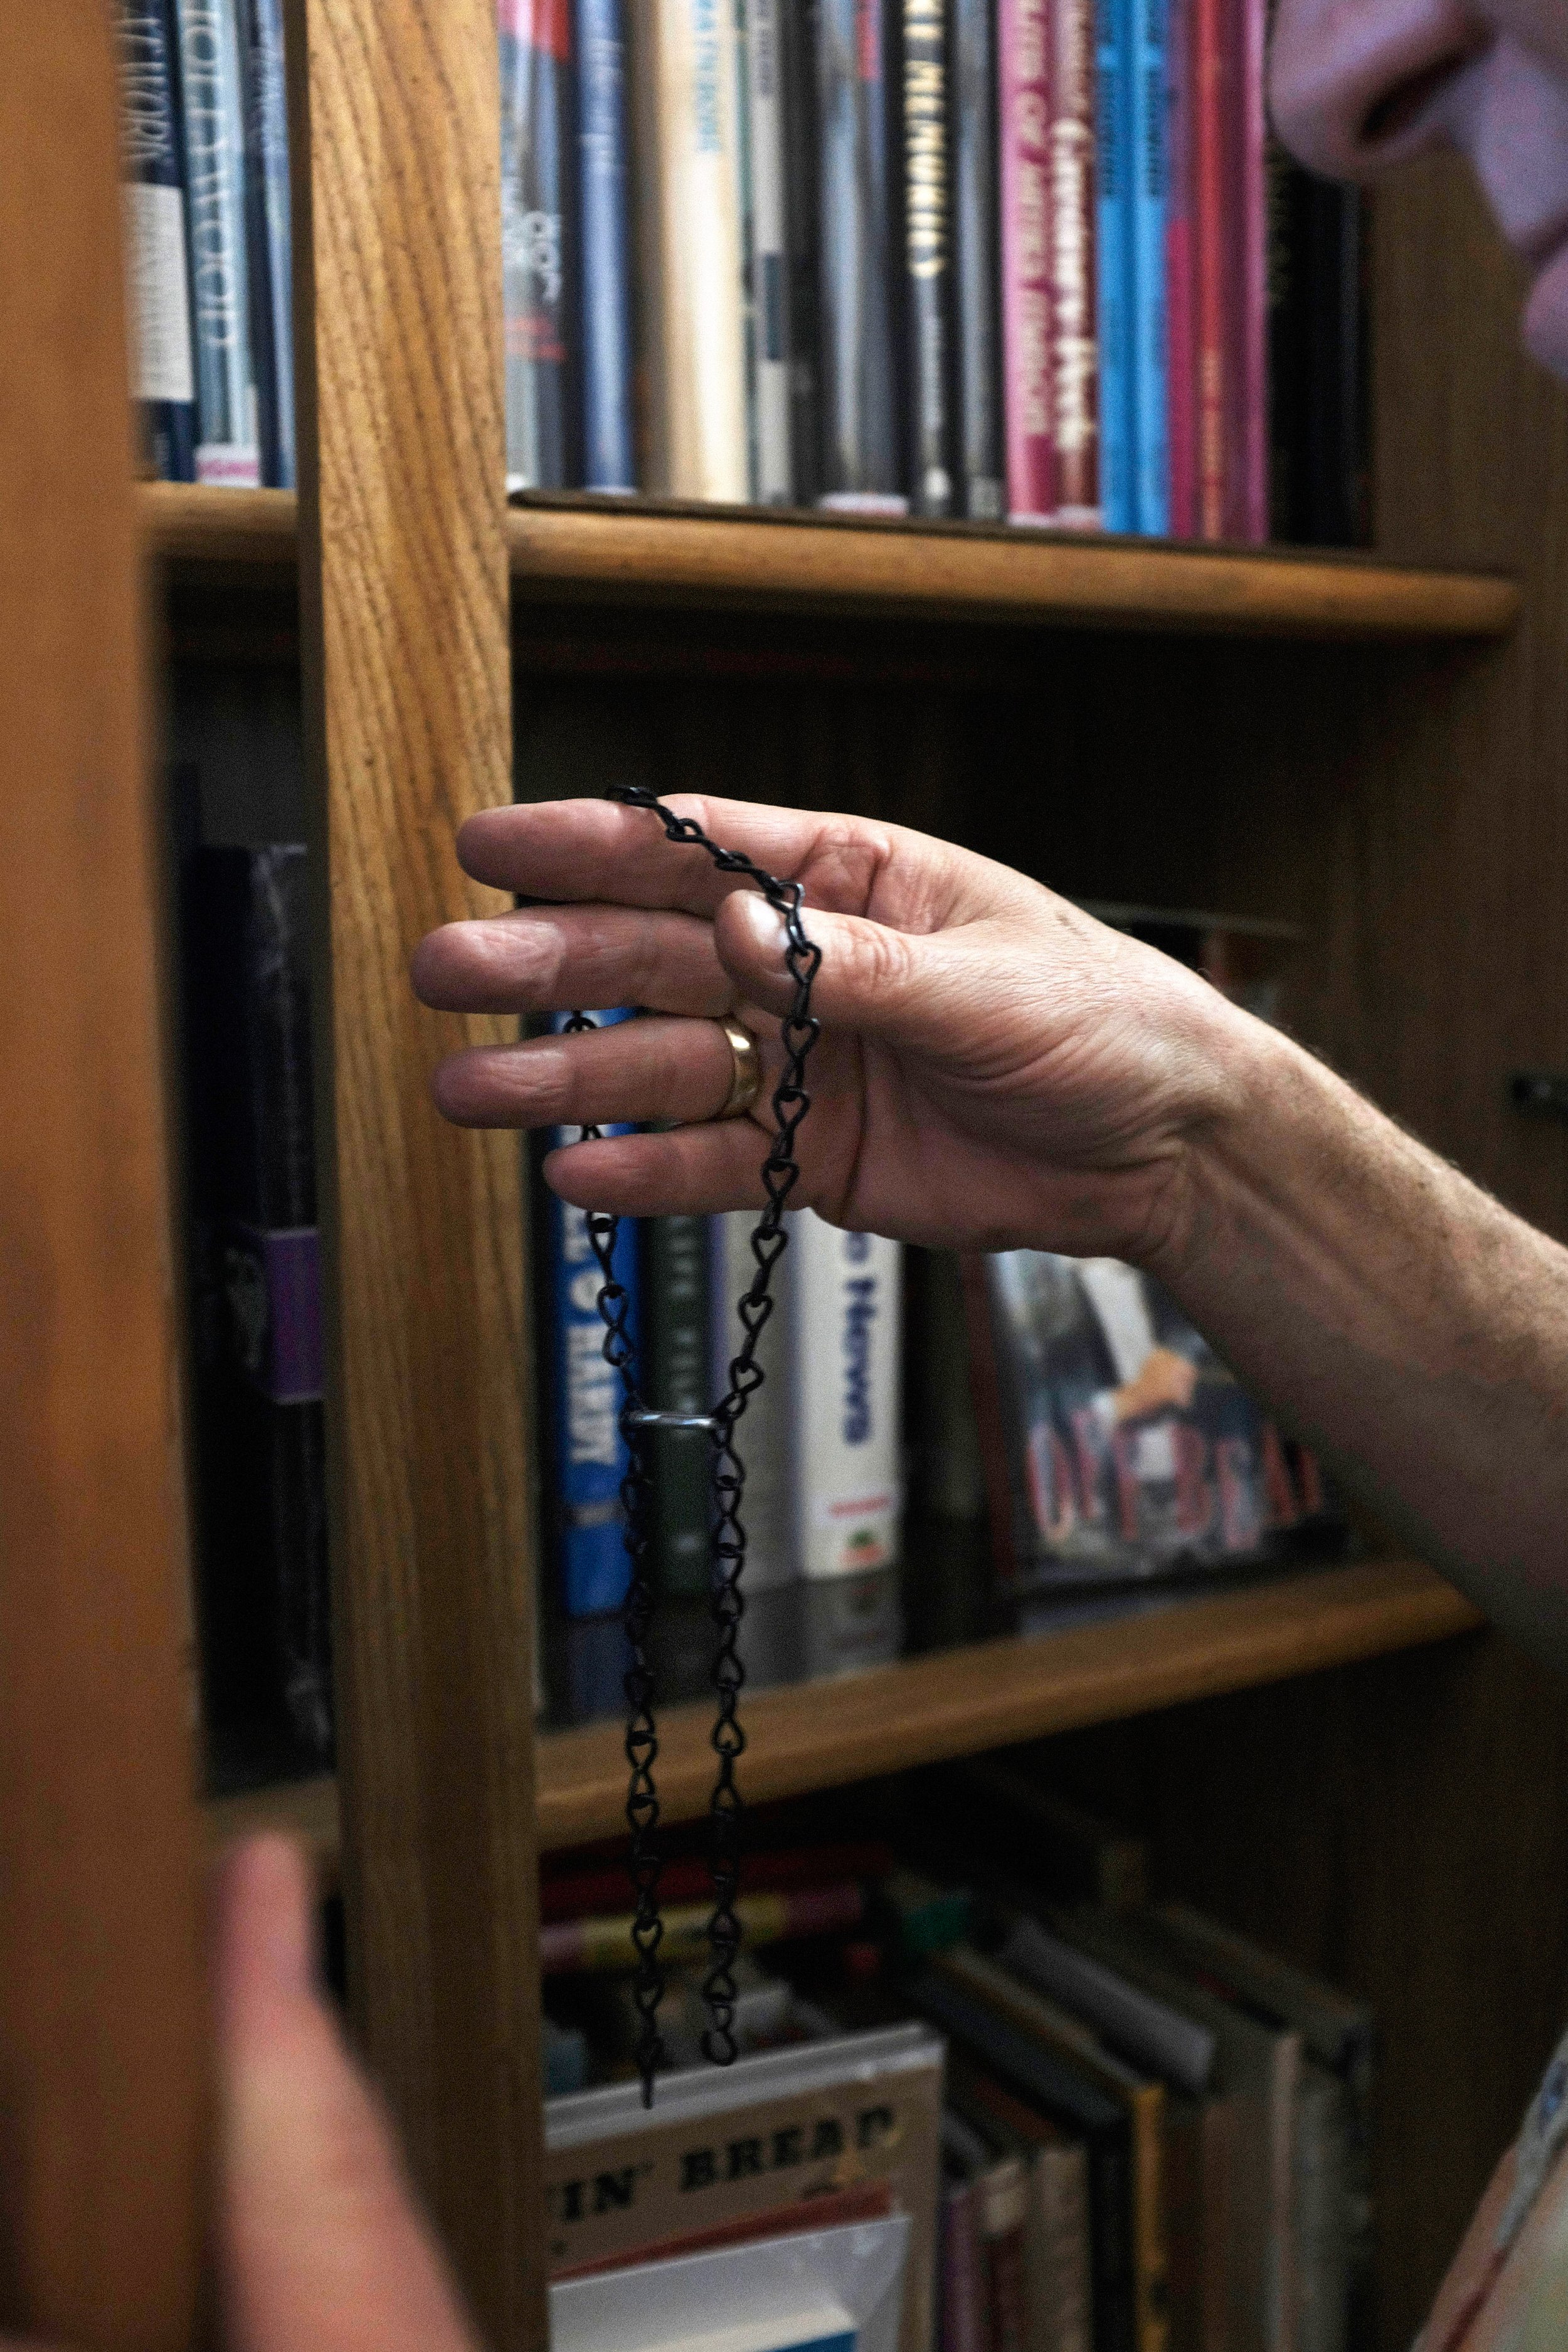  Holding the keys to his locked cases, David Kaye begins to close the door to the collection of books he has finished showing a customer. David Kaye Bookstore and Memorabilia in Woodland Hills, Los Angeles, California on November 26, 2021.(Anna Sophi